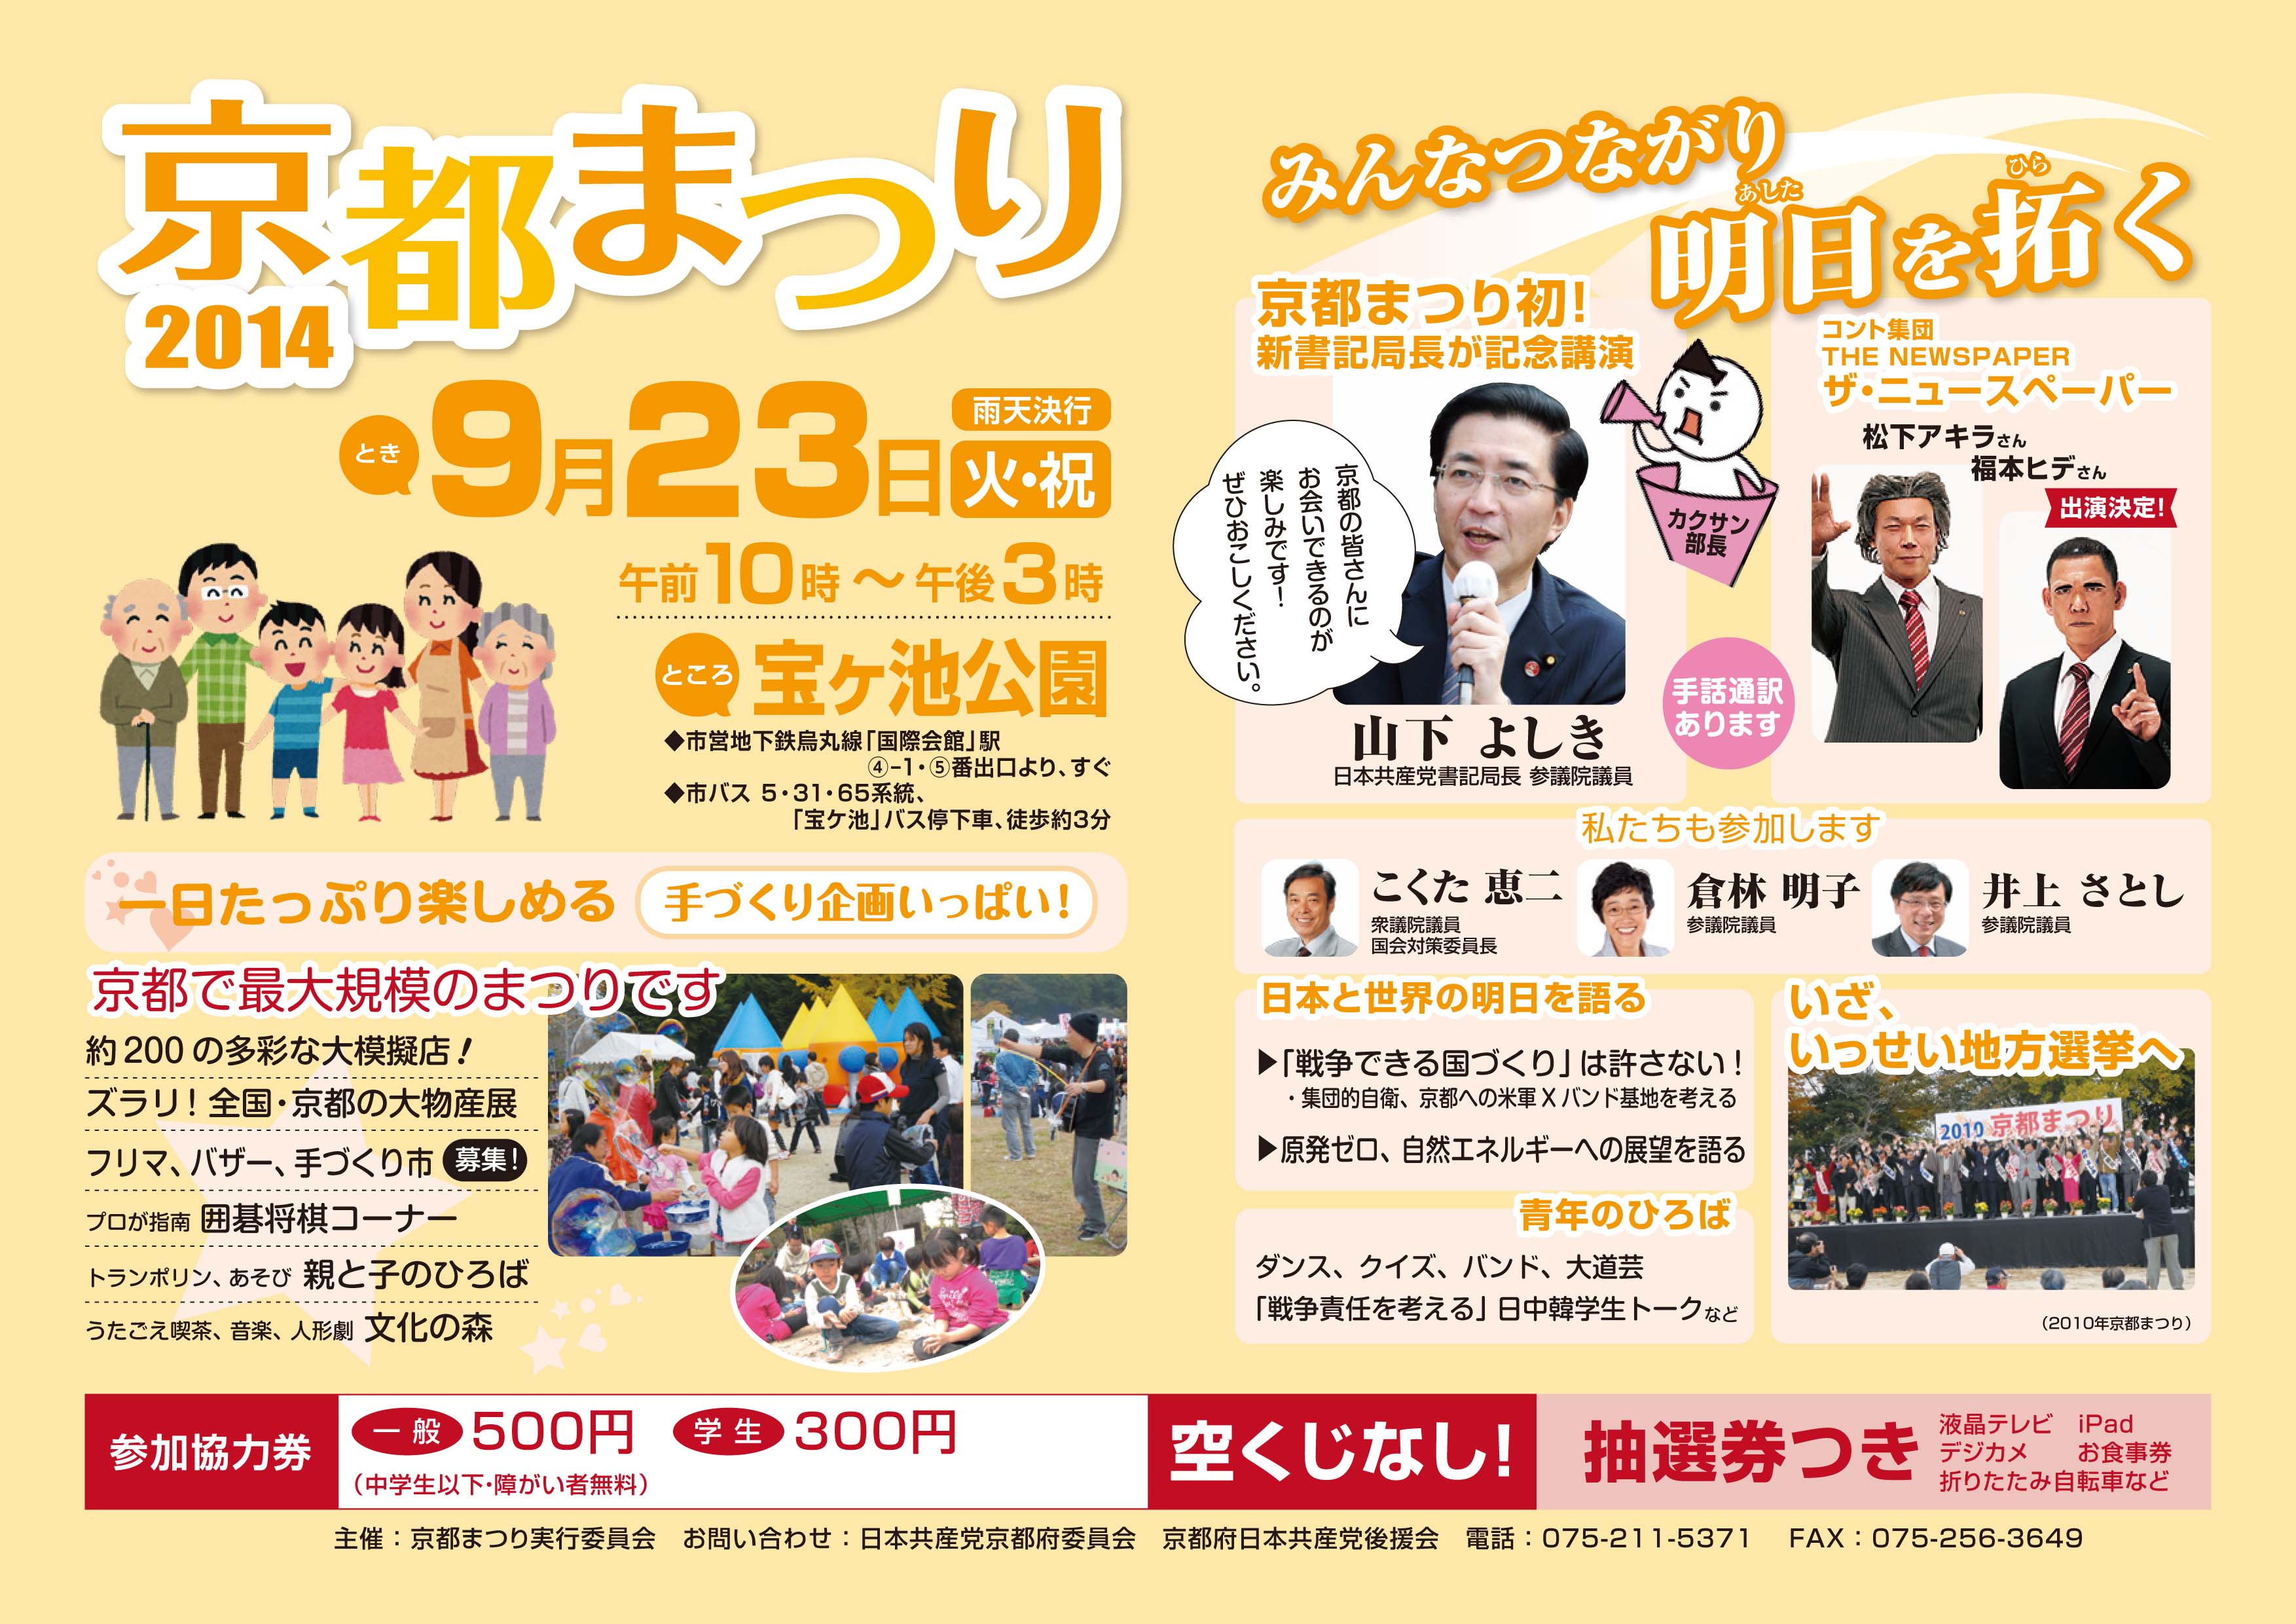 http://www.jcp-kyoto.jp/old/activities/20140923-kyoto-festival.jpg